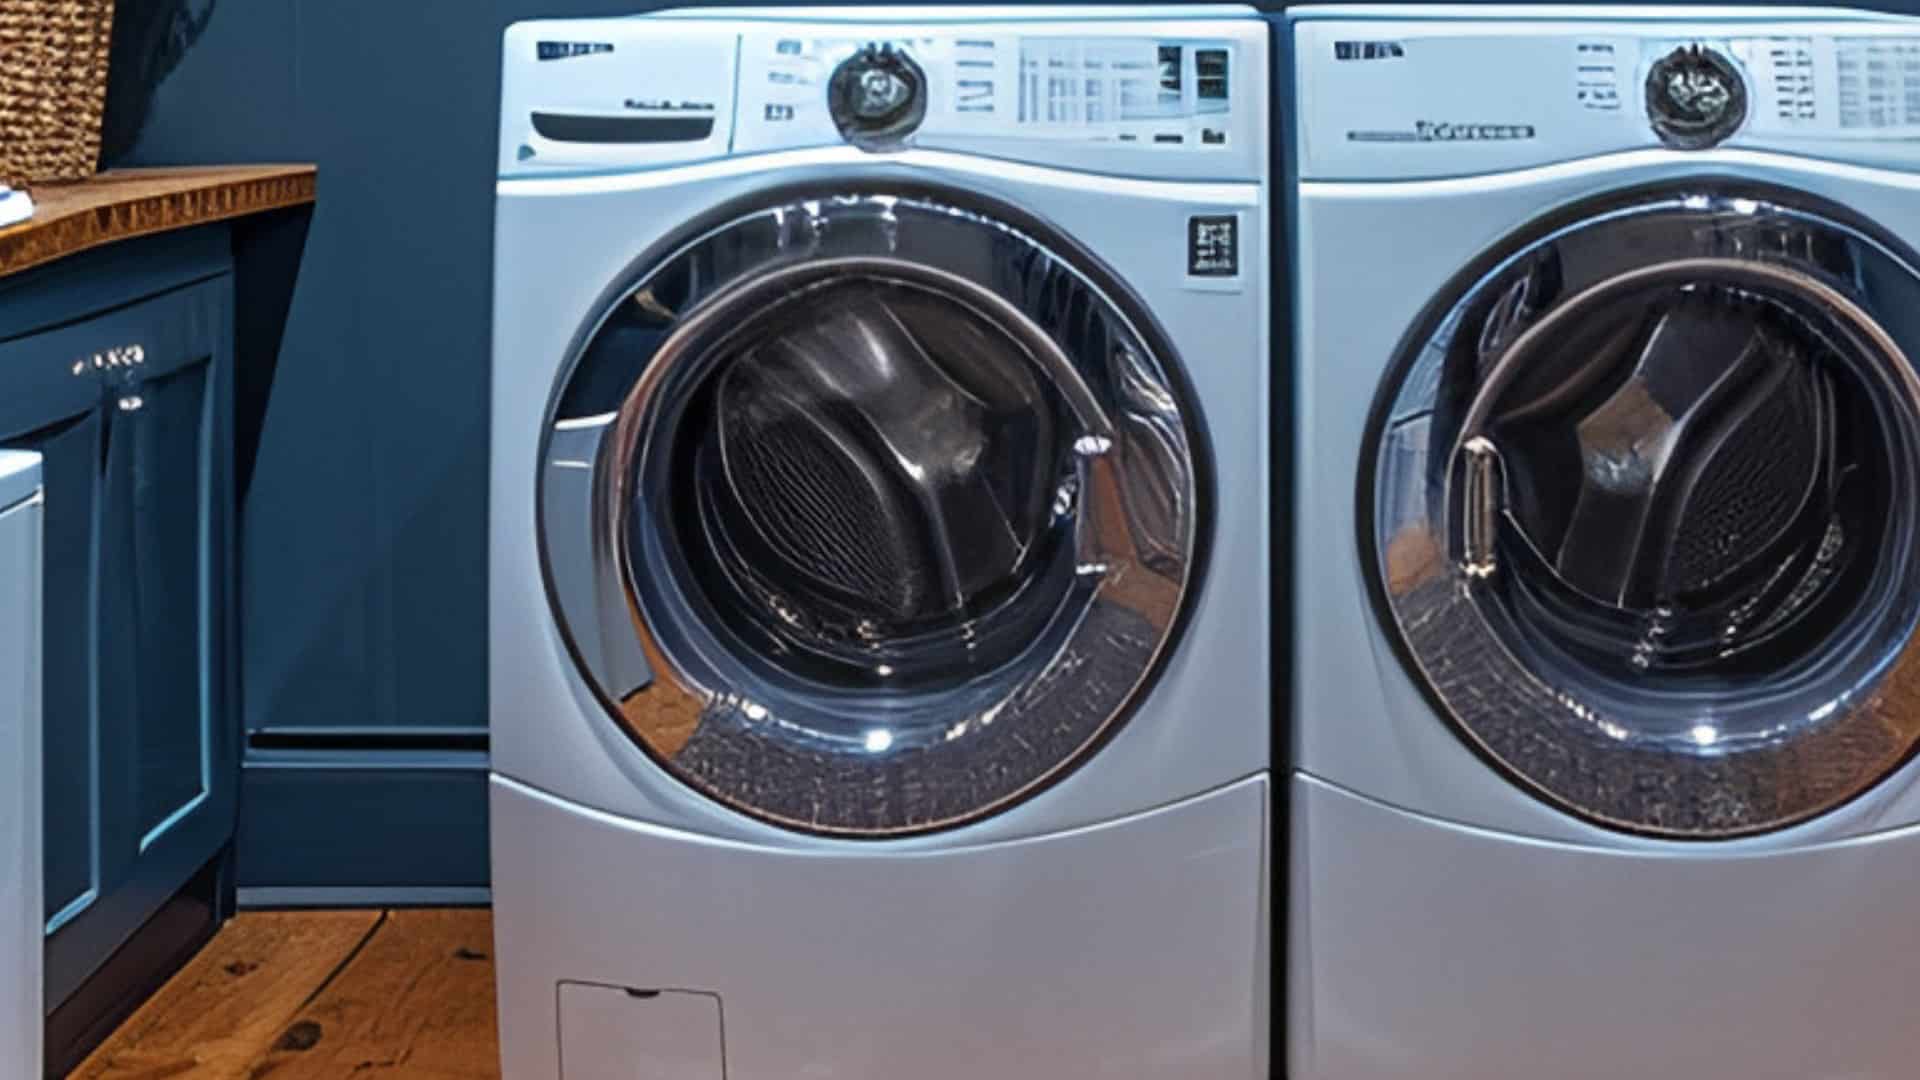 Featured image for “How to Fix the Electrolux Dryer Error Code E64”